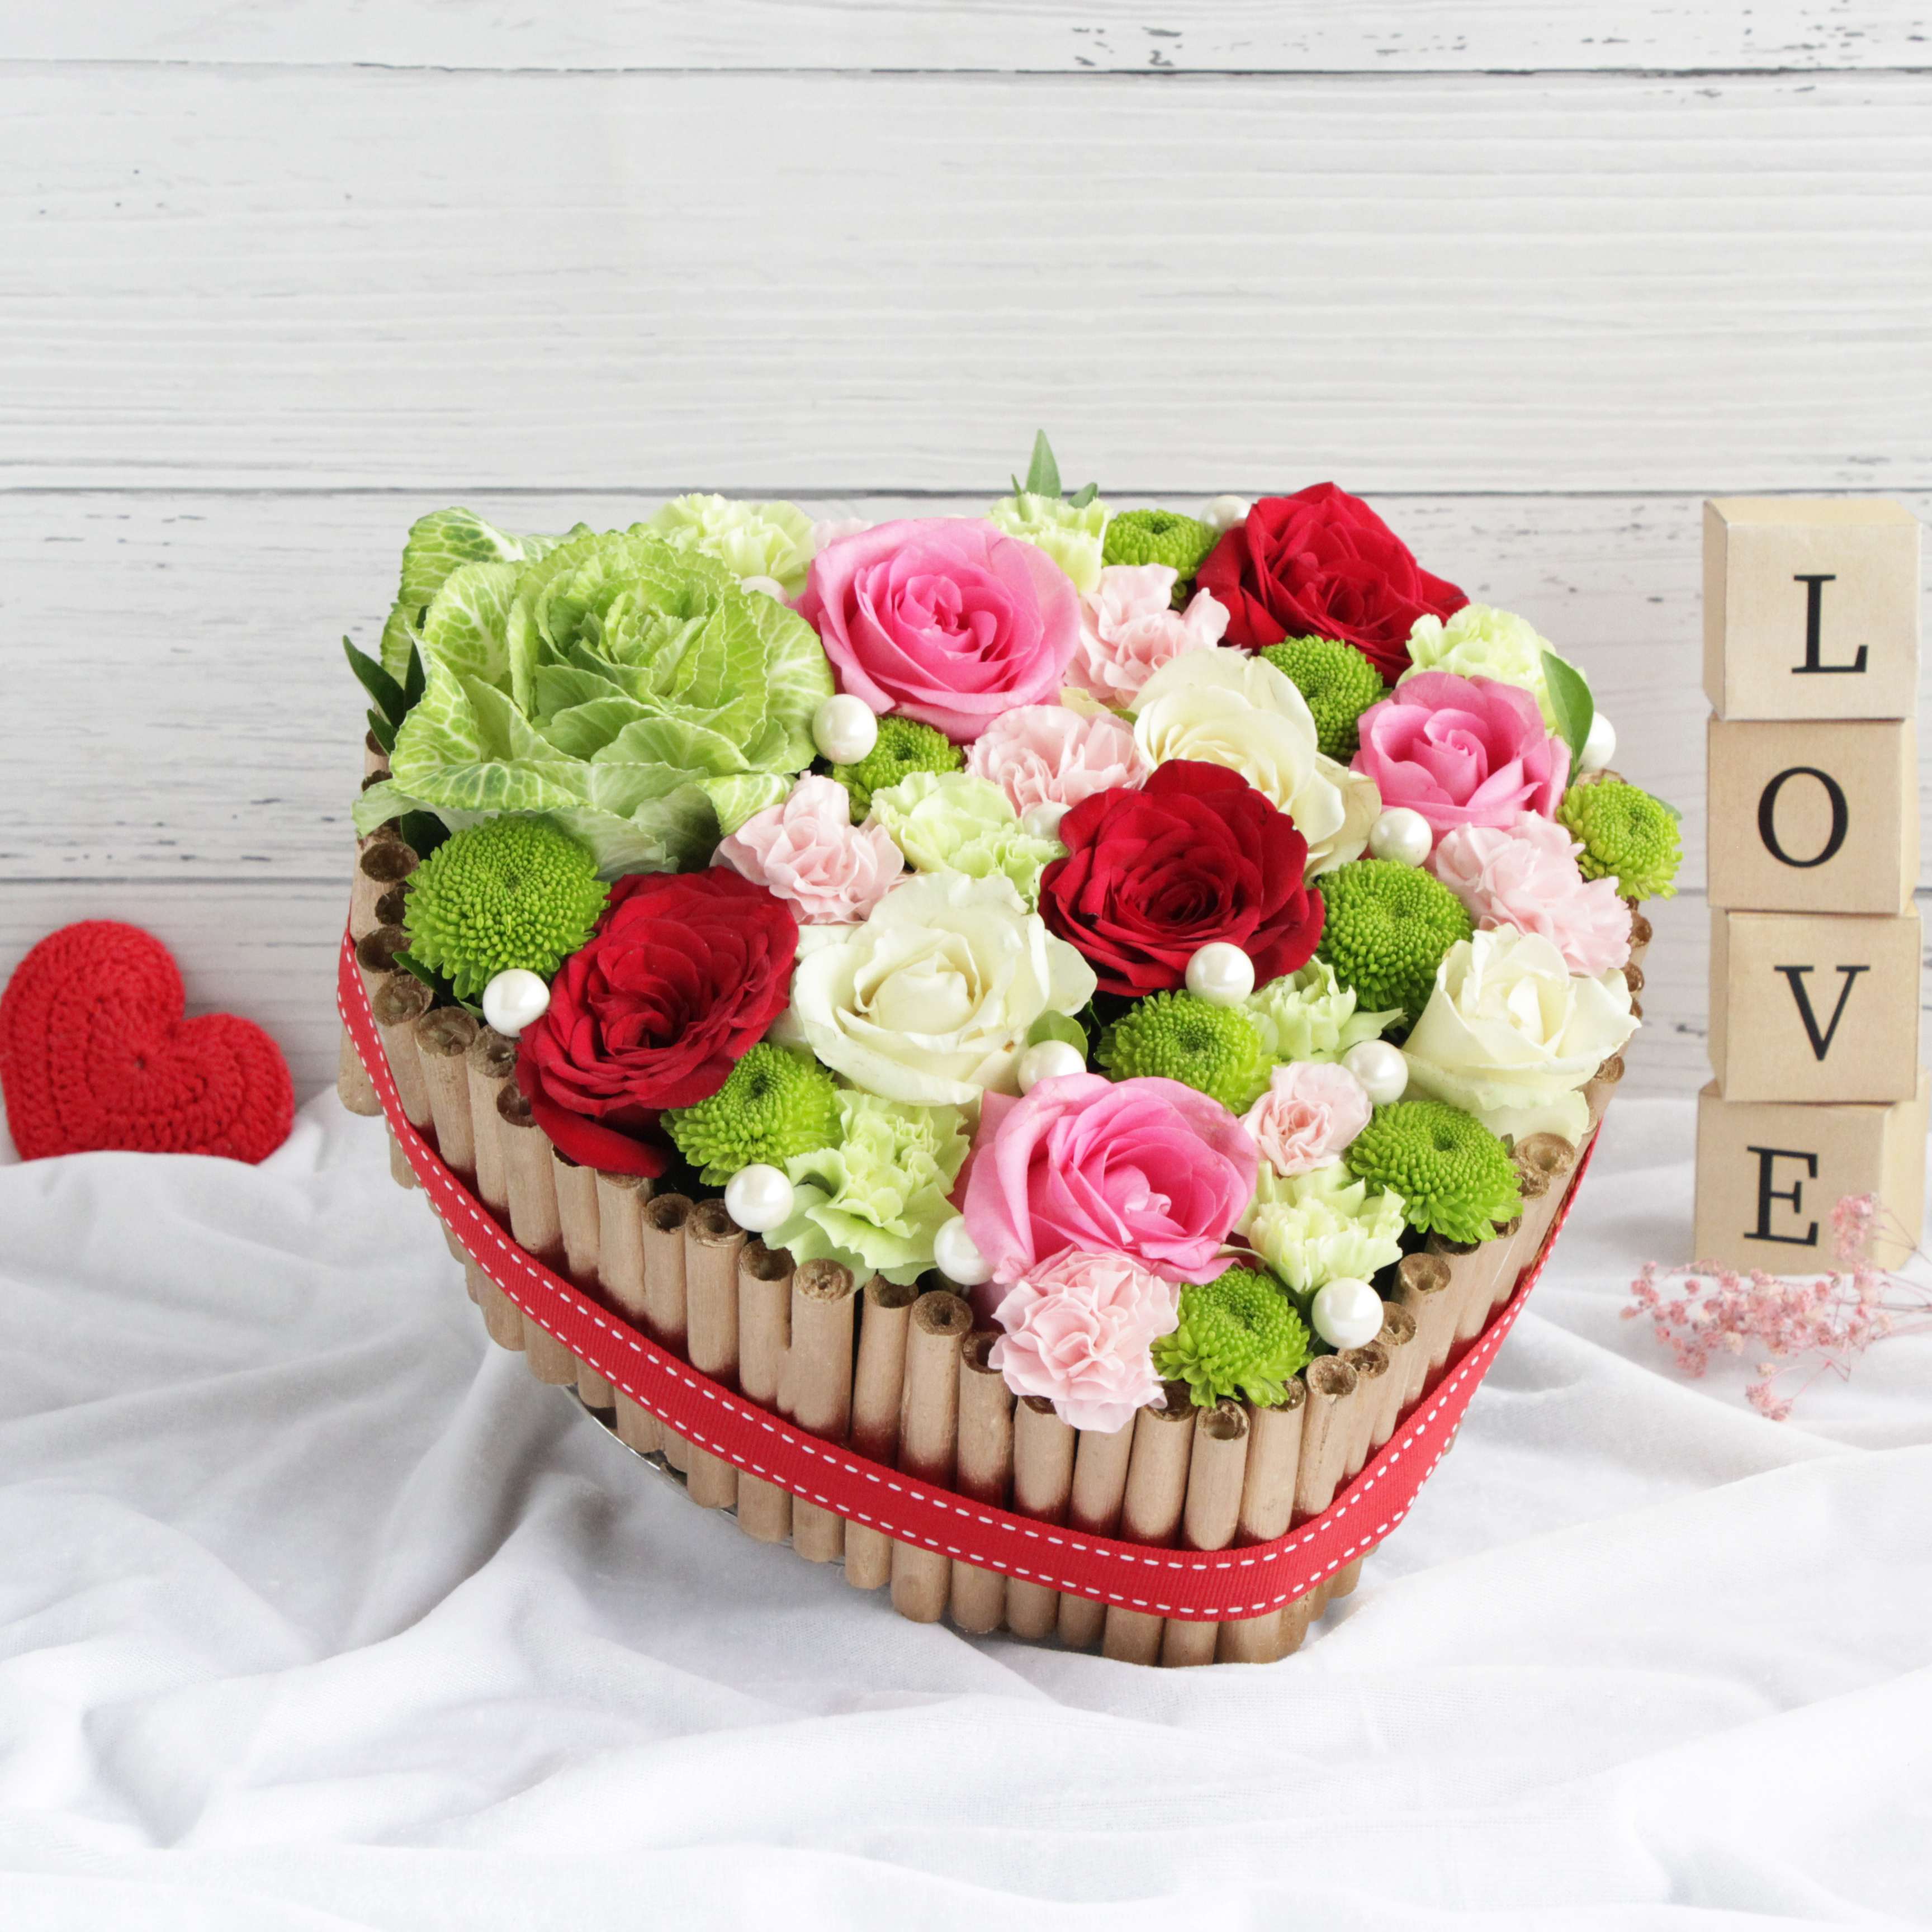 5 Romantic Plants to Gift on Valentine's Day | Bouqs Blog